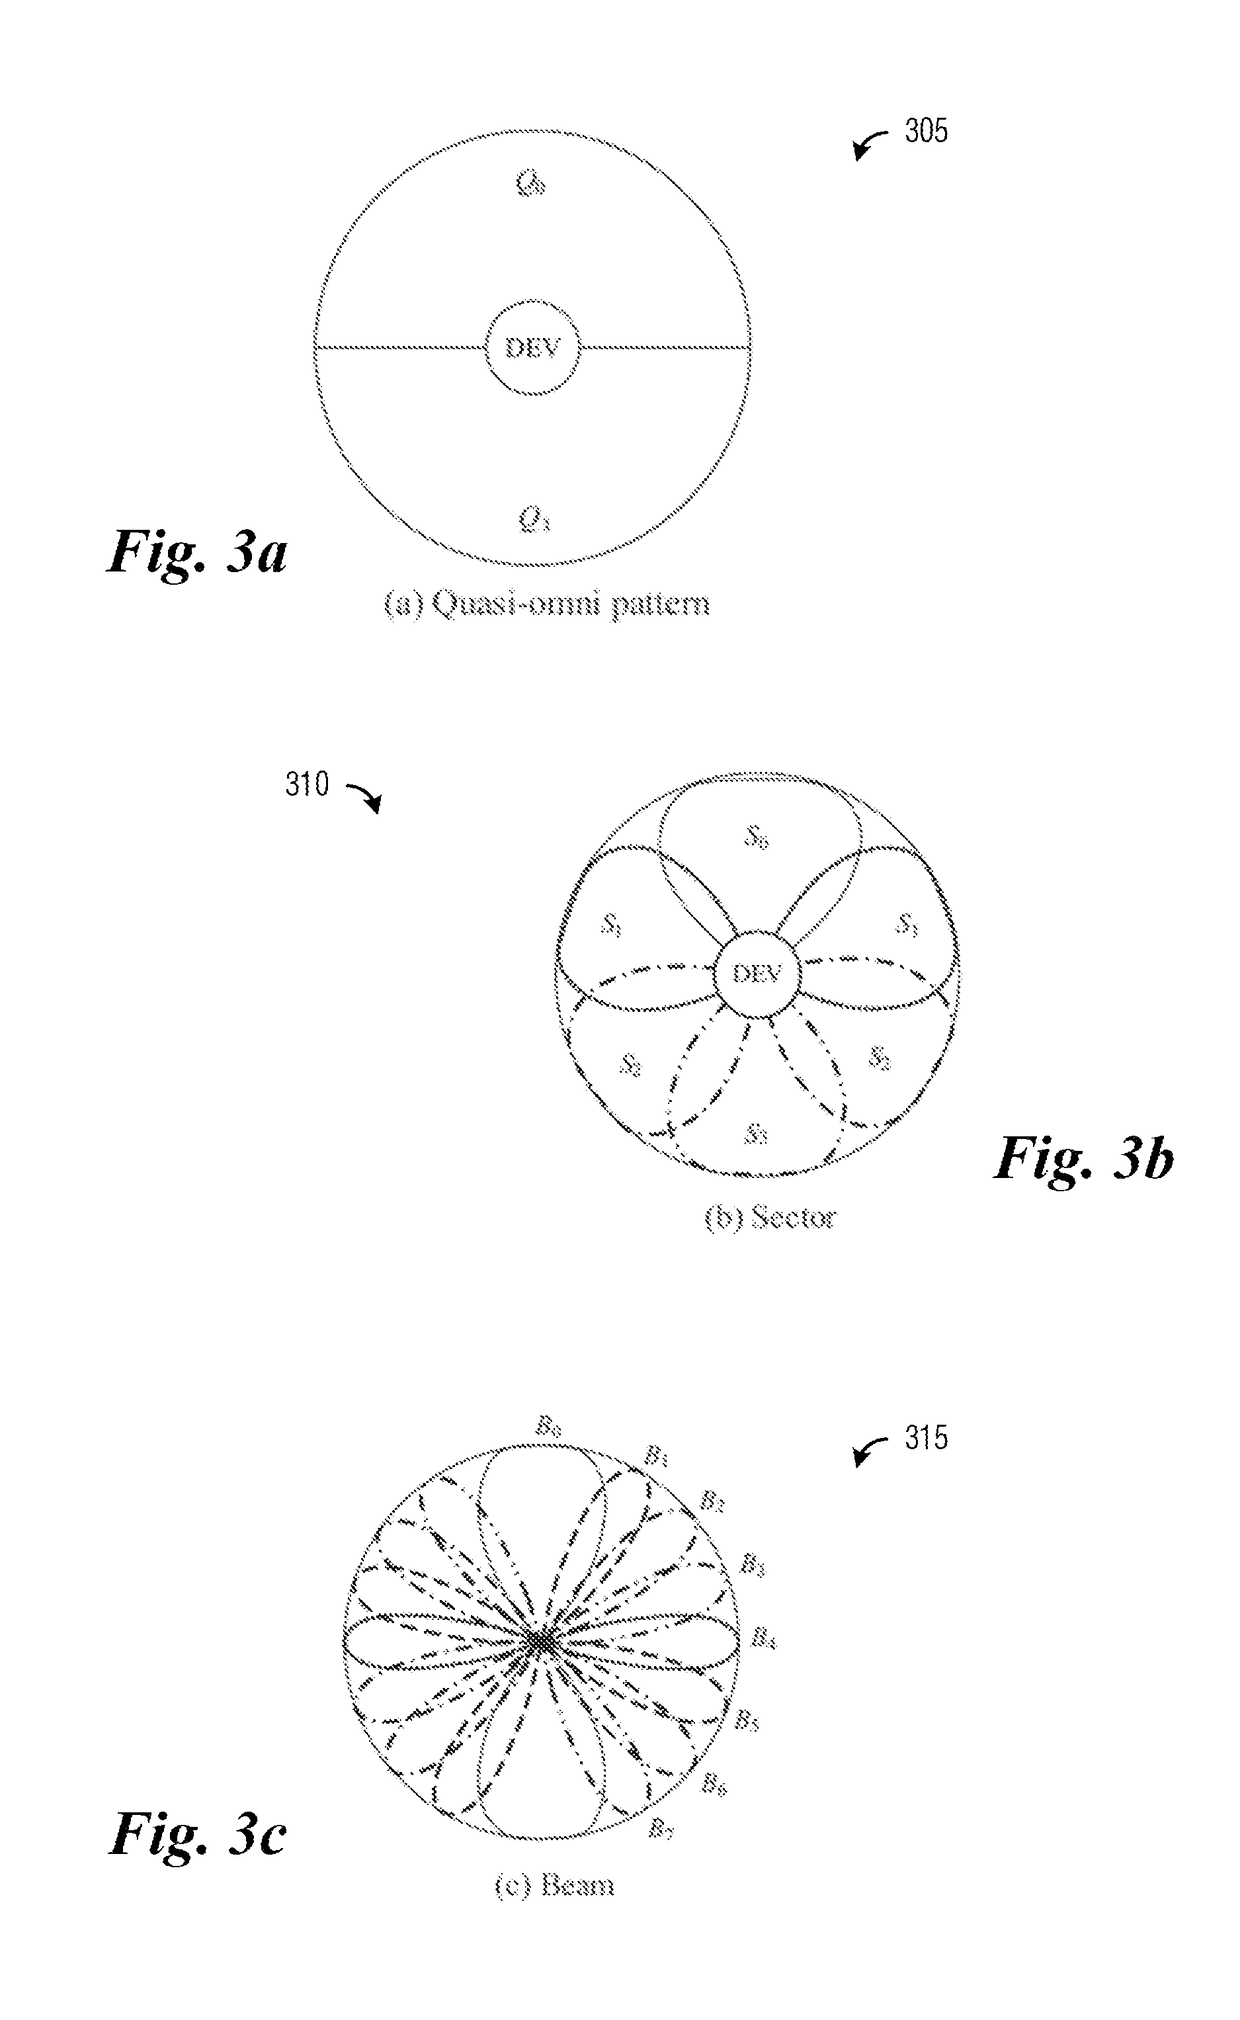 System and method for multi-level beamformed non-orthogonal multiple access communications